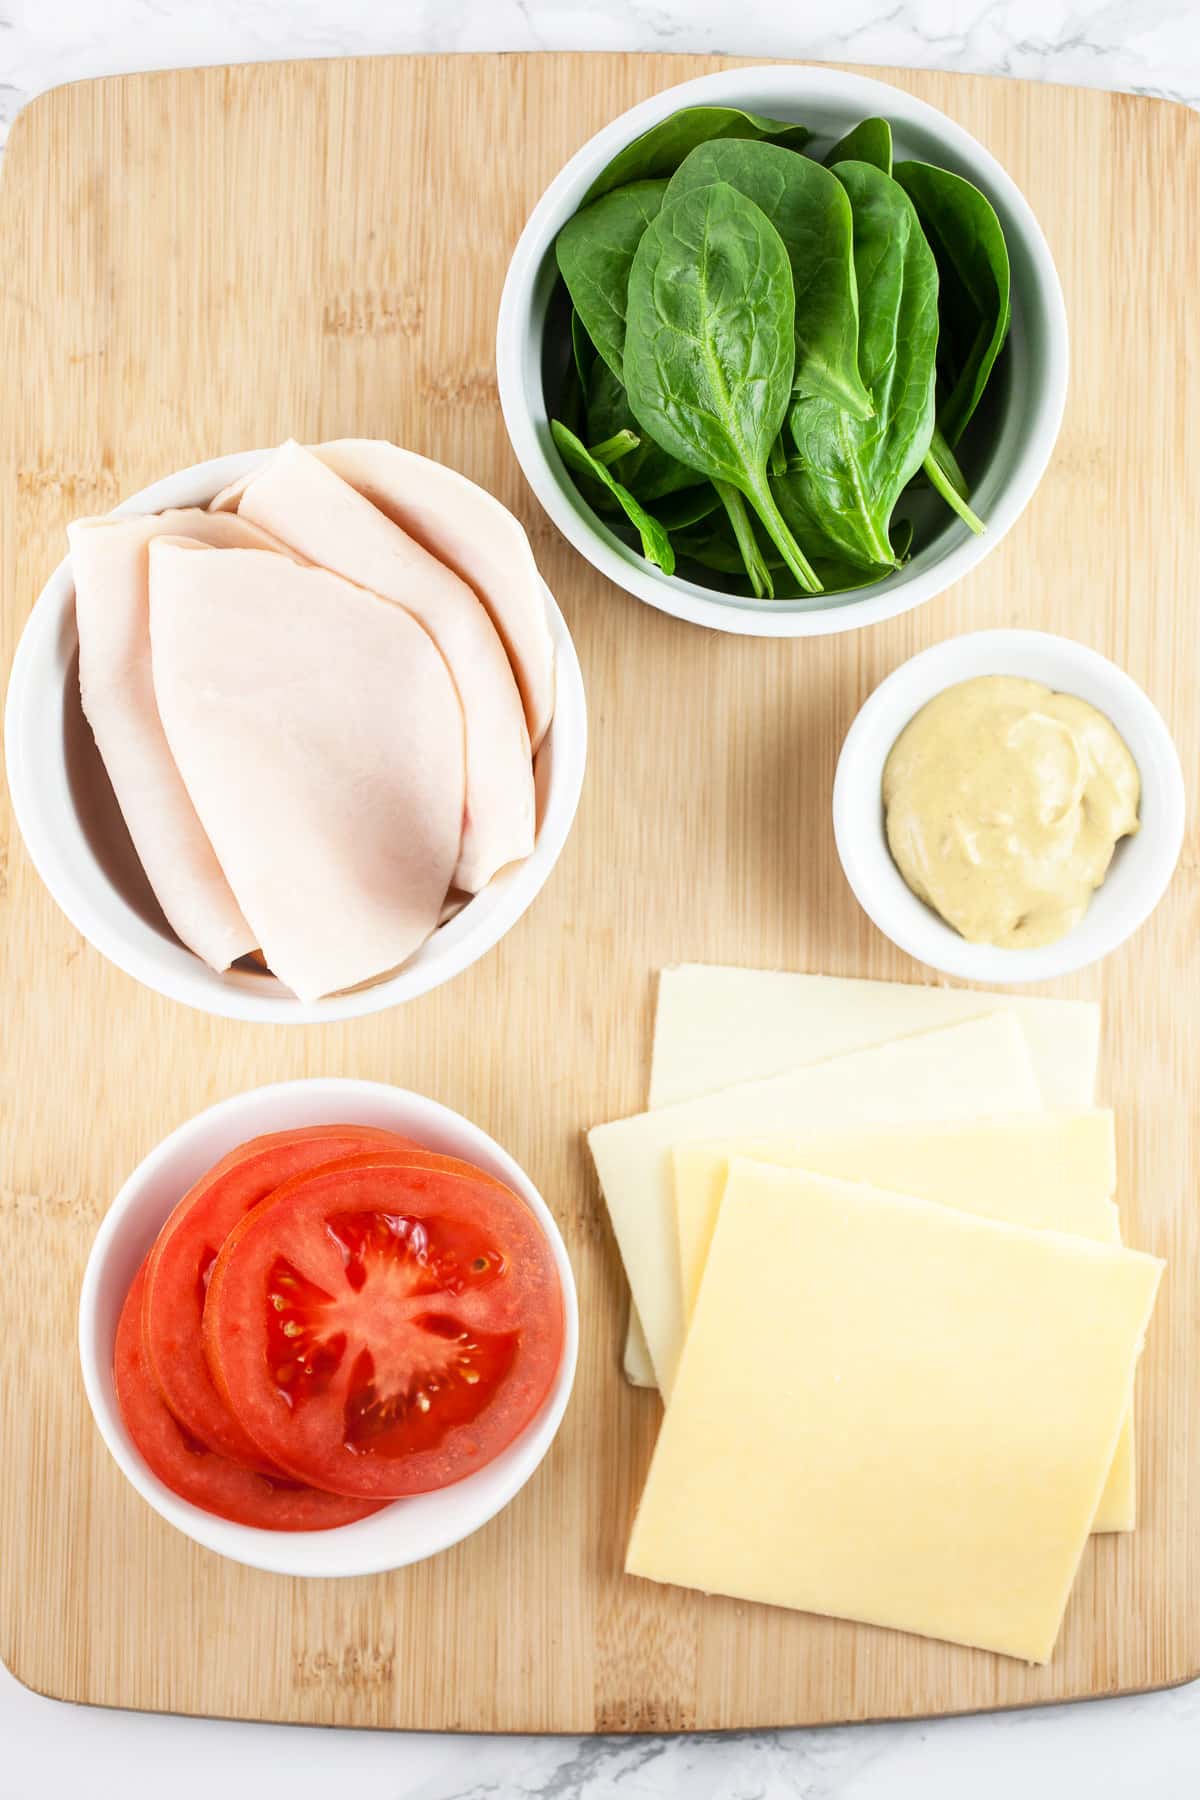 Sliced cheese, tomatoes, deli chicken, spinach, and mustard on wooden cutting board.